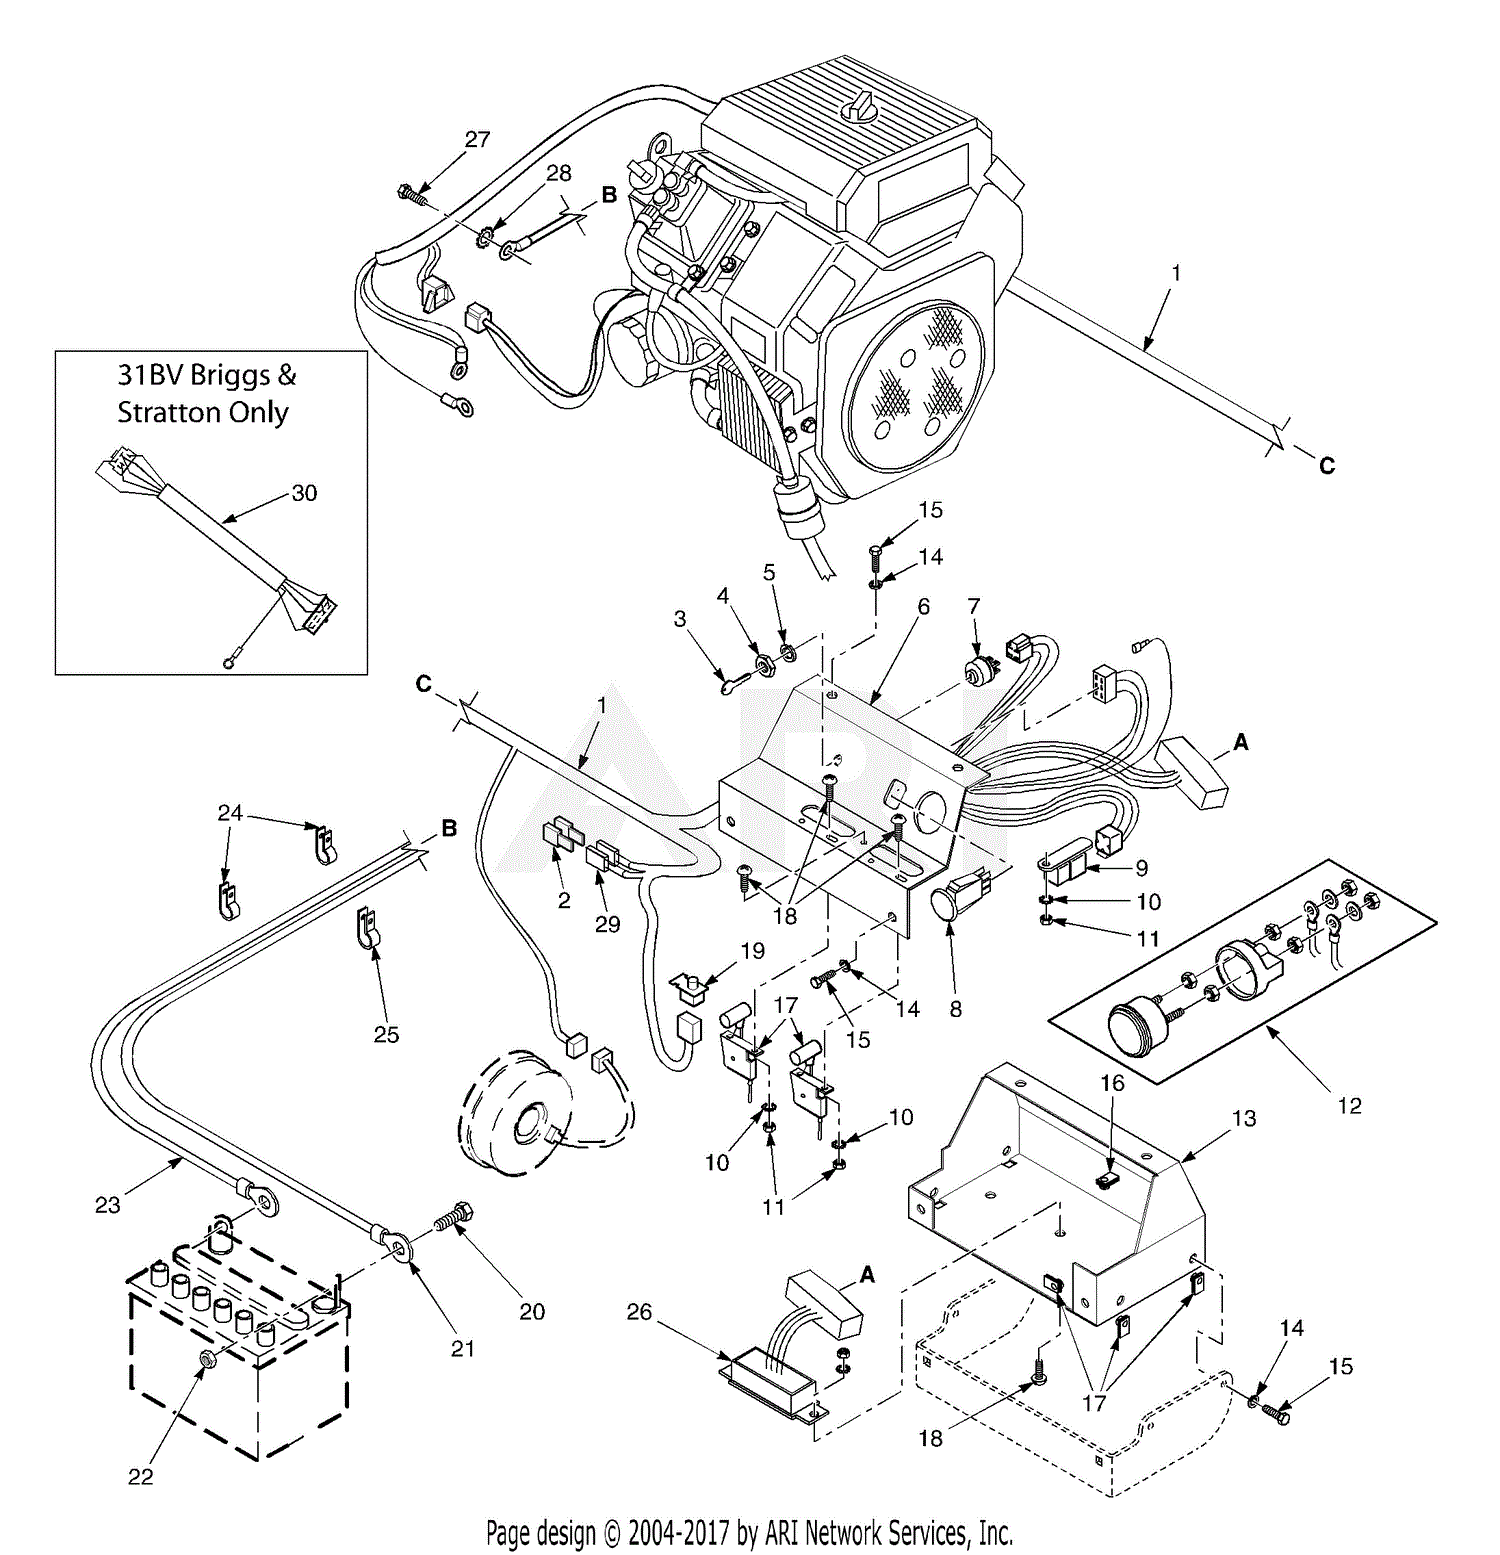 Scag Stt61a 27ch Turf Tiger S N 9380001 9389999 Parts Diagram For Electrical System Kohler Briggs Stratton